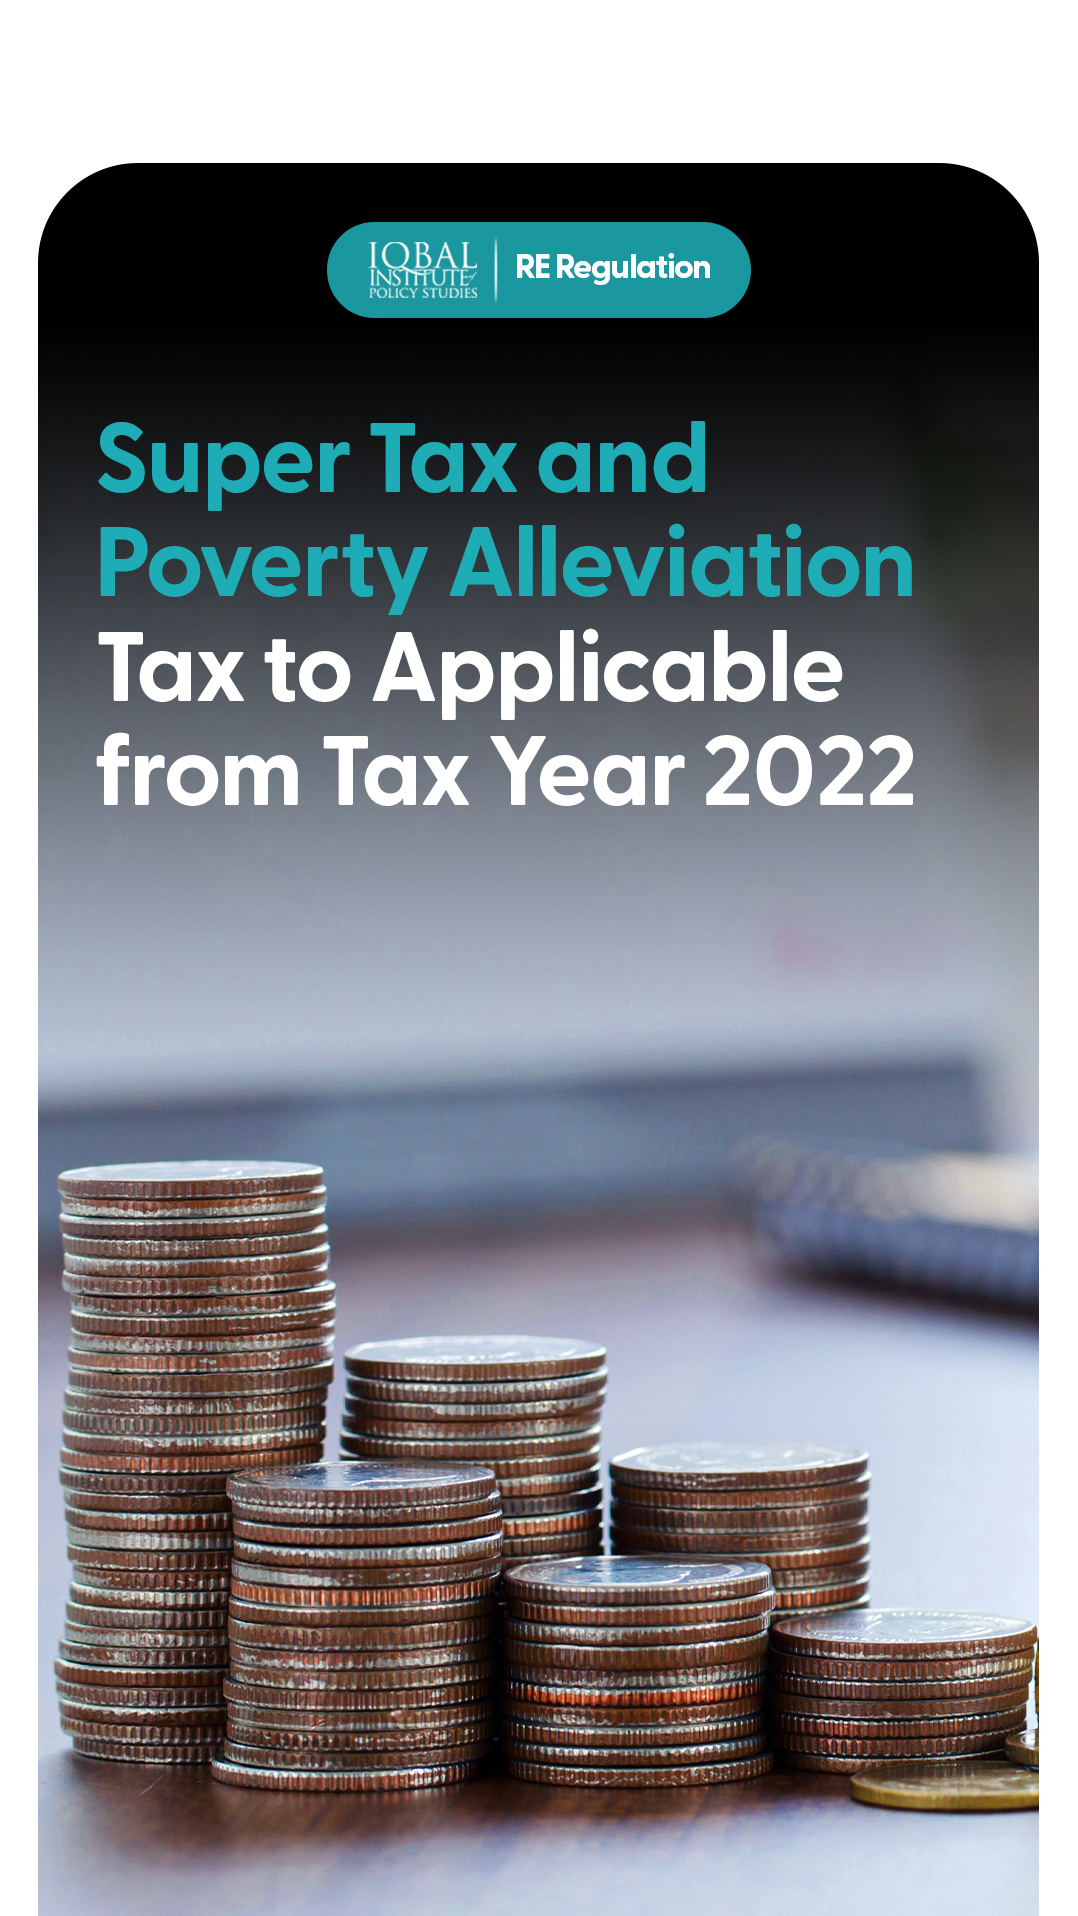 Super tax and poverty alleviation tax to applicable from tax year 2022